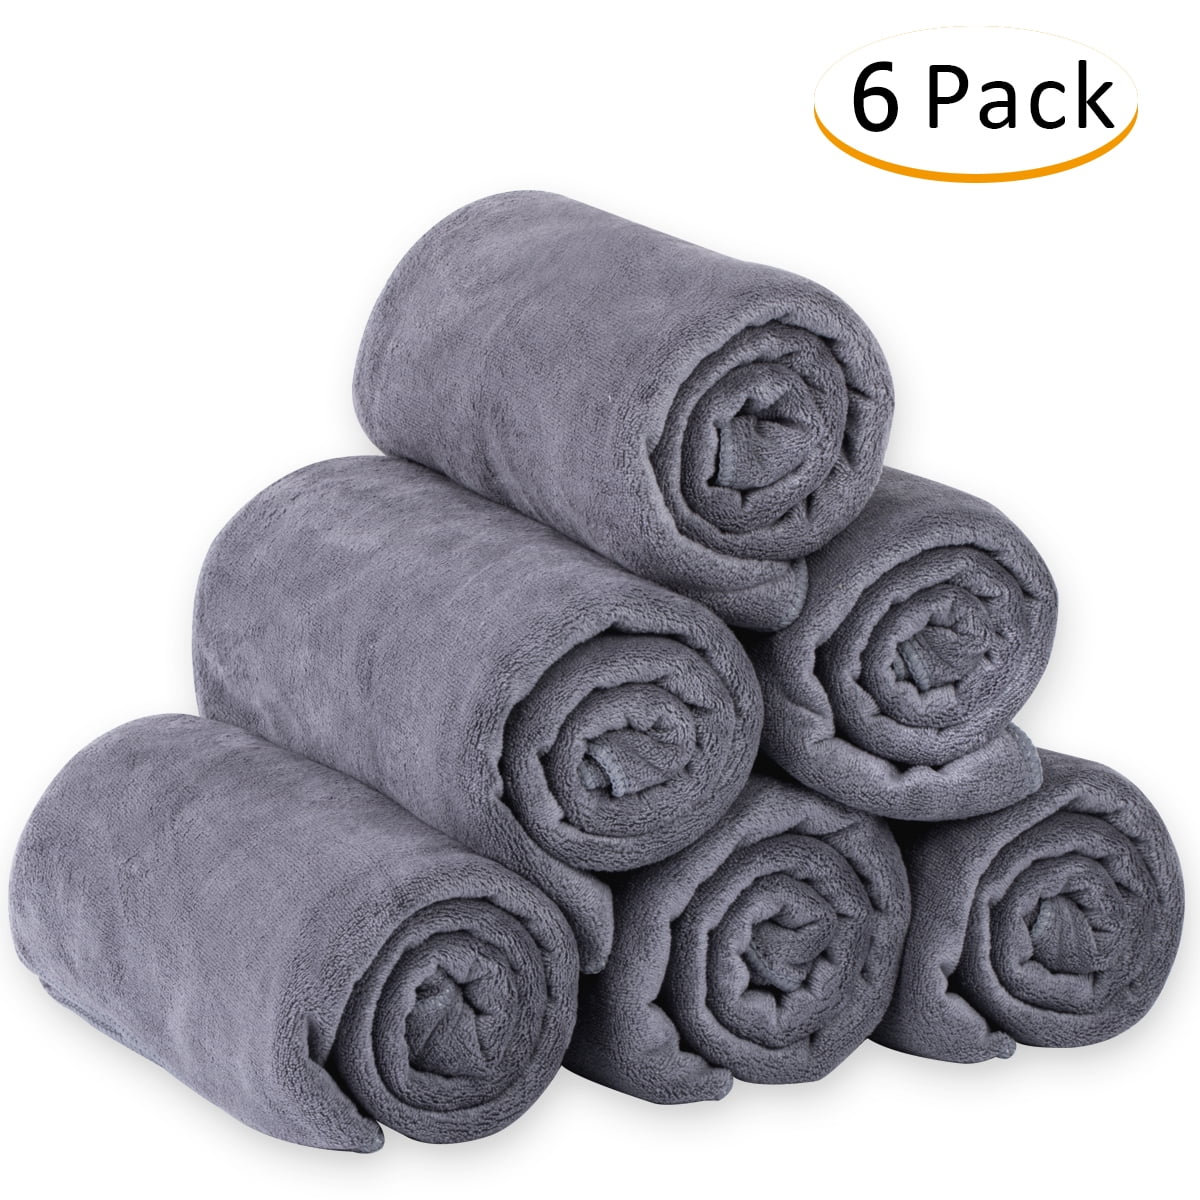 Absorbent Quick Drying Antibacterial FAST SHIPPING! 2 Pack Microfiber Towel Set 